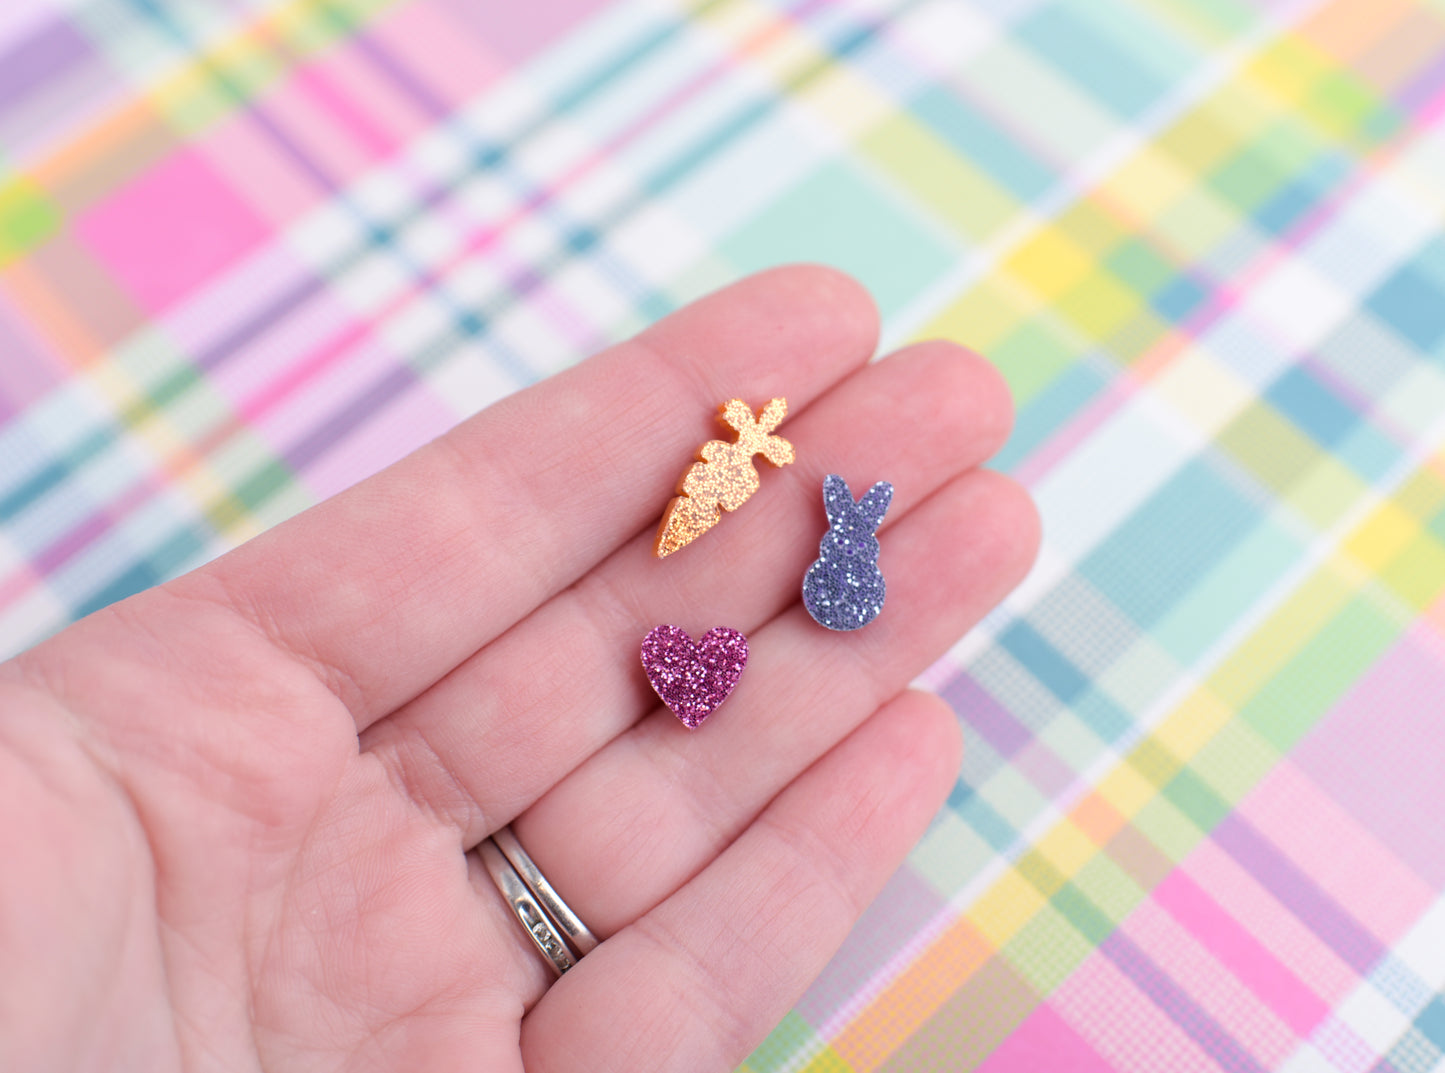 Glitter Easter Earring Trio with Titanium Posts- Bunny, Carrot, and Heart